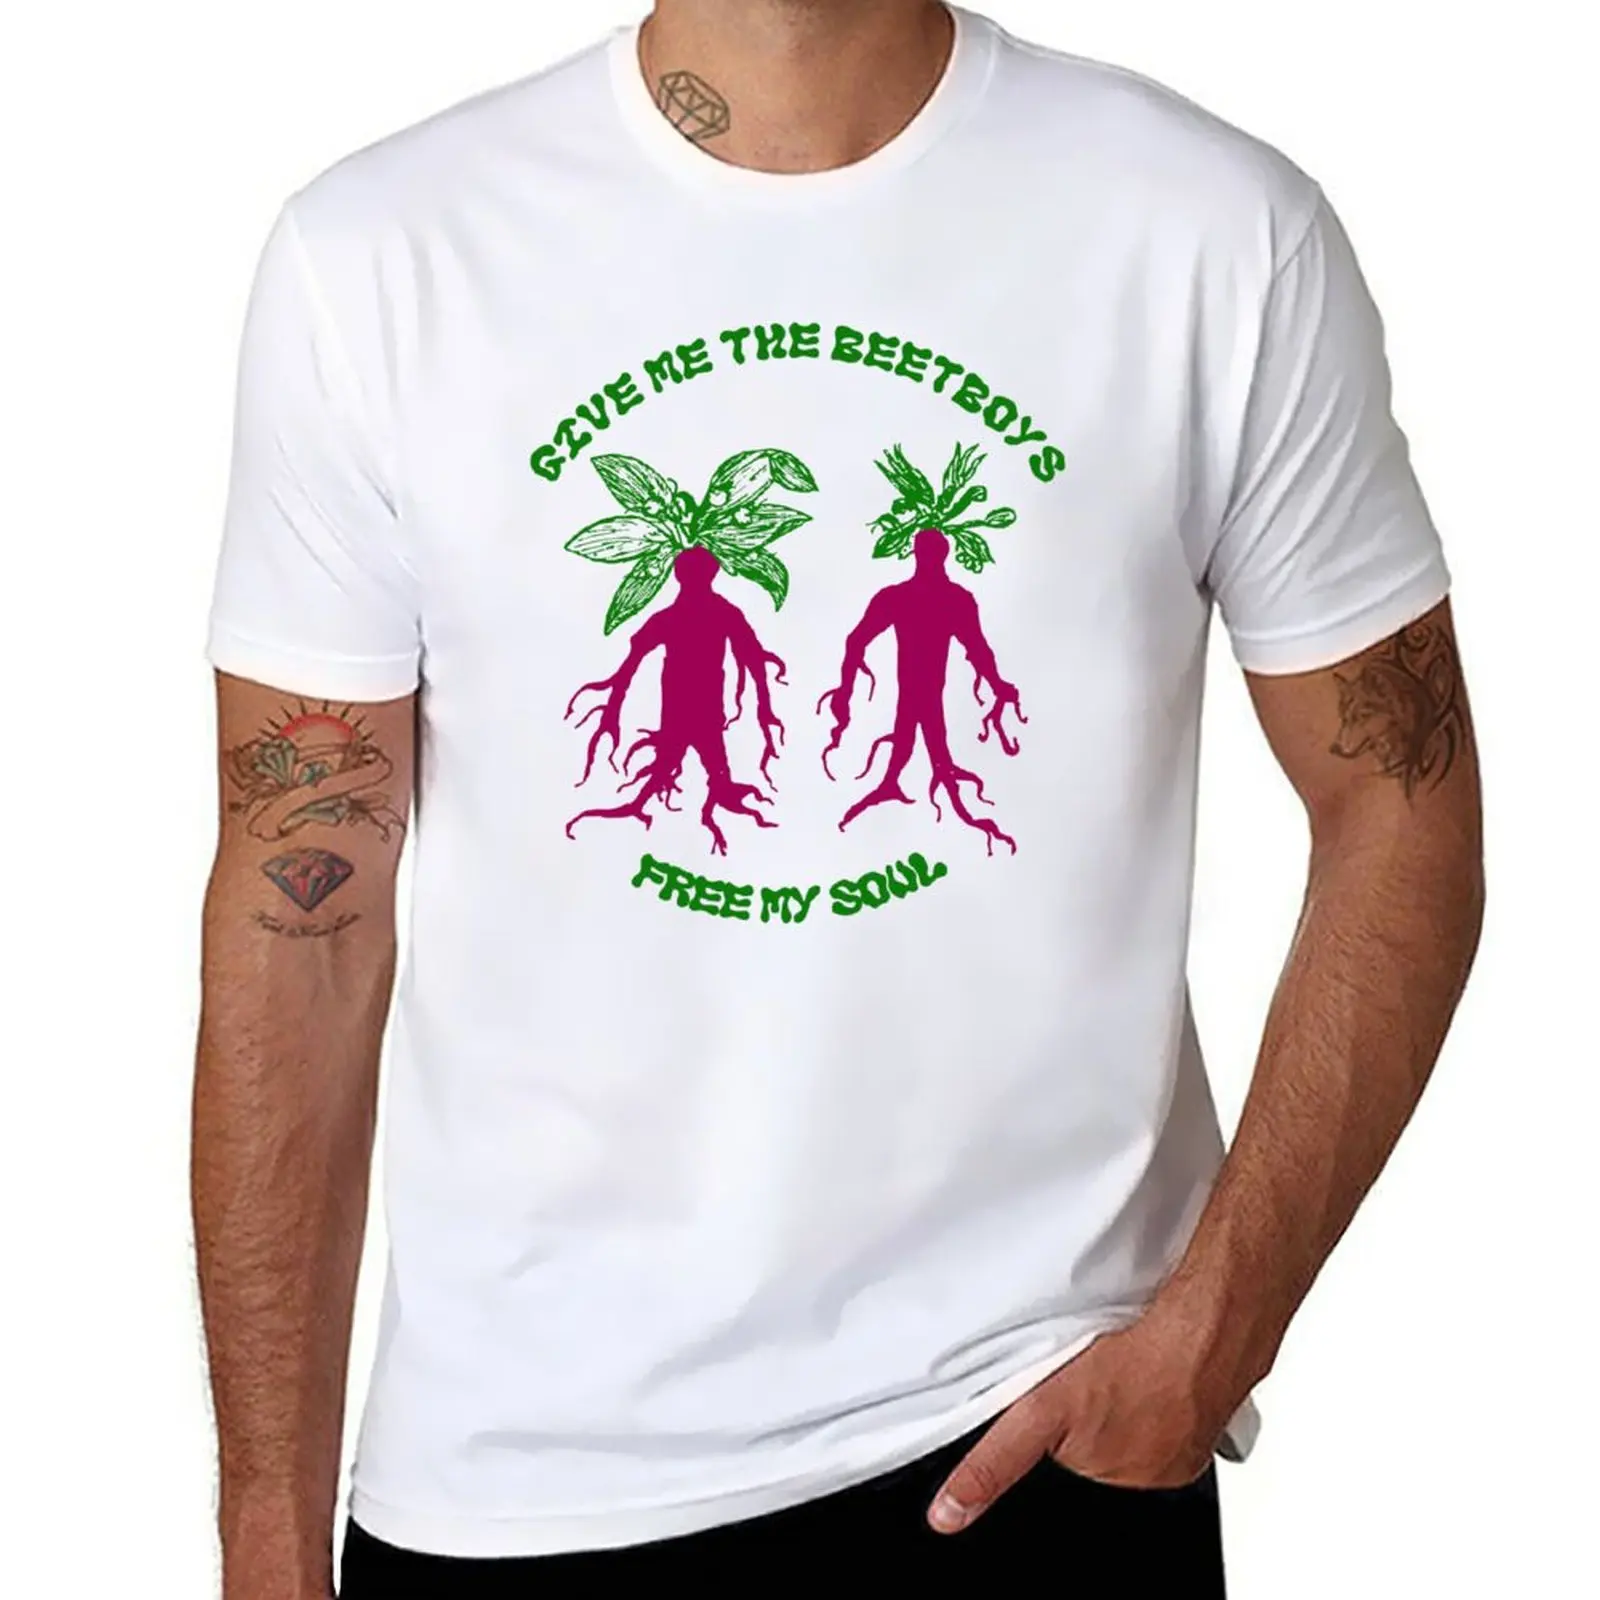 

New Give Me The Beetboys Free My Soul T-Shirt Aesthetic clothing plus size t shirts sweat shirts, men